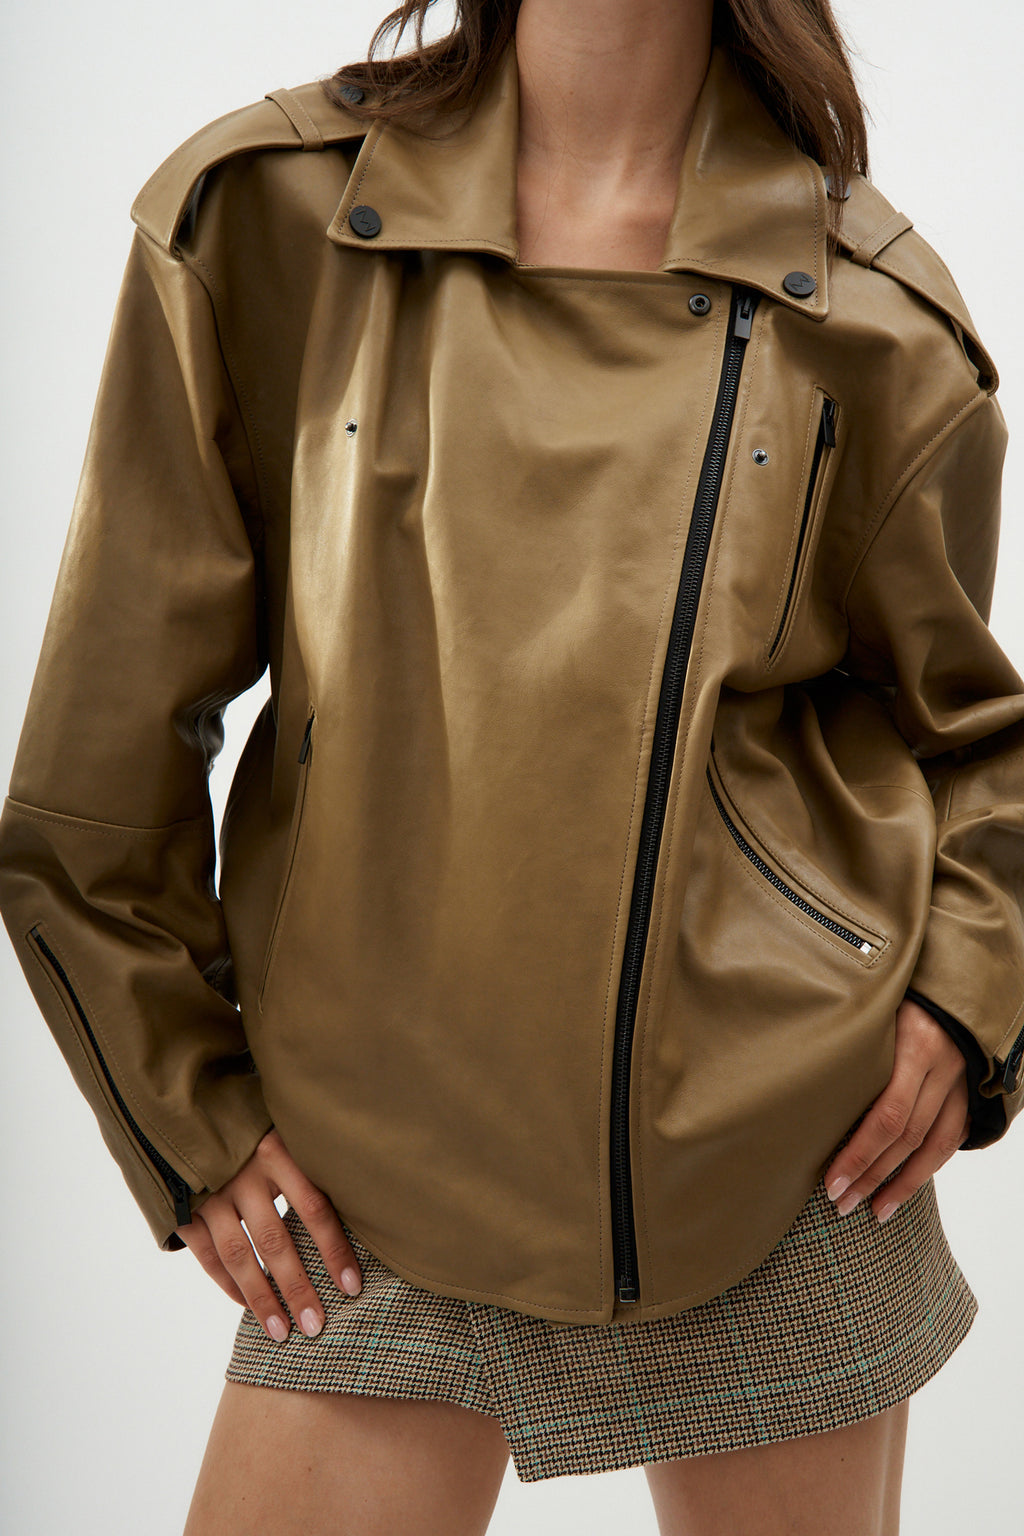 Bezons Leather Taupe Jacket